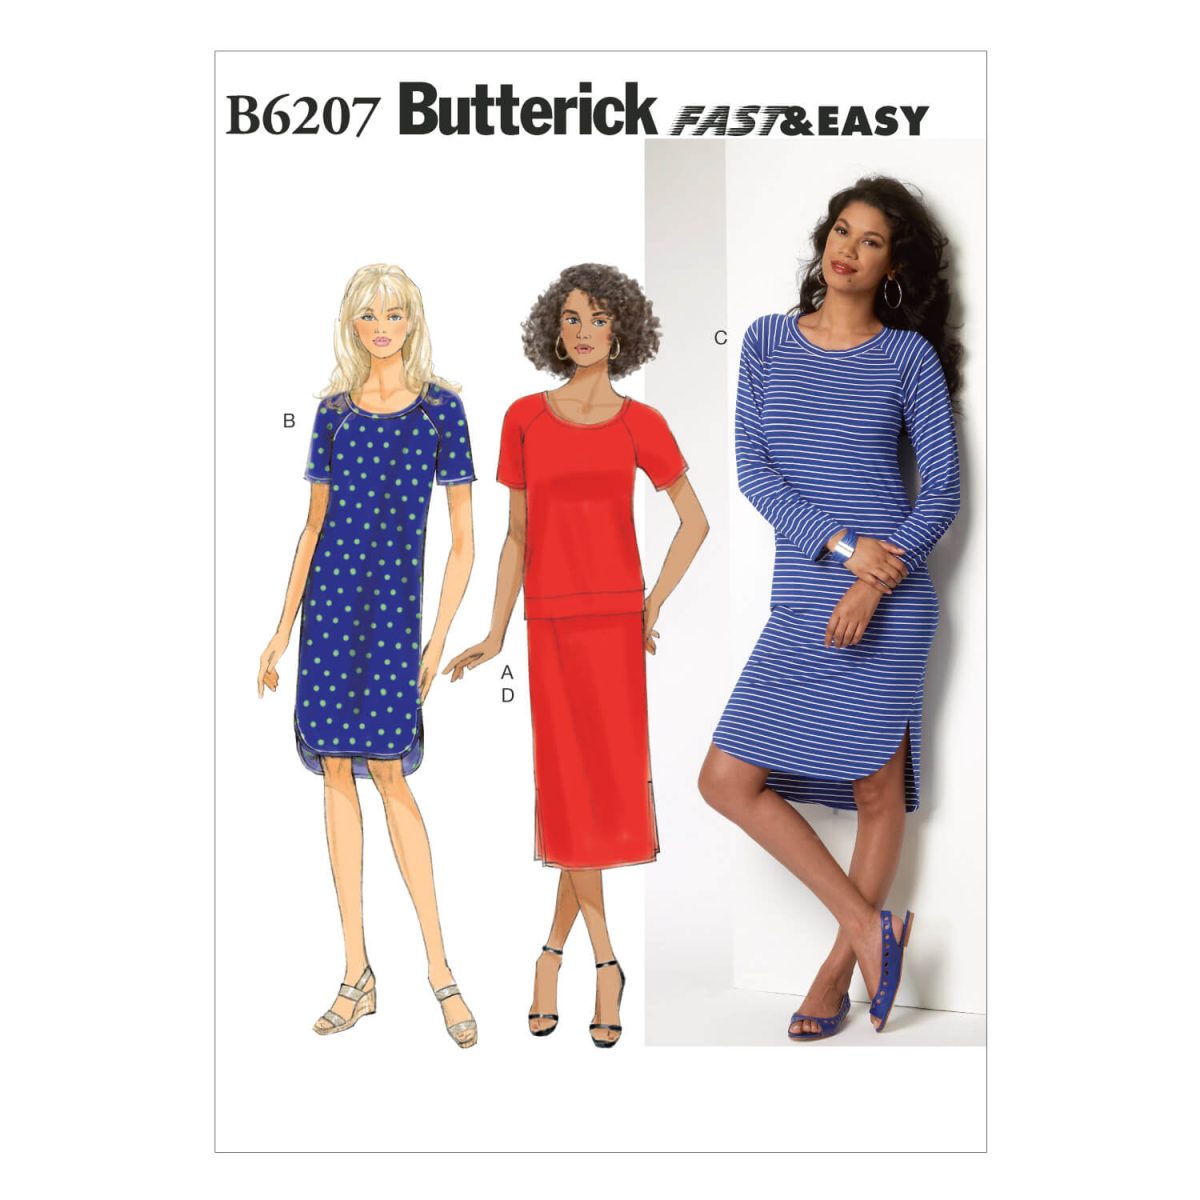 Butterick Sewing Pattern B6207 Misses' Top, Dress and Skirt